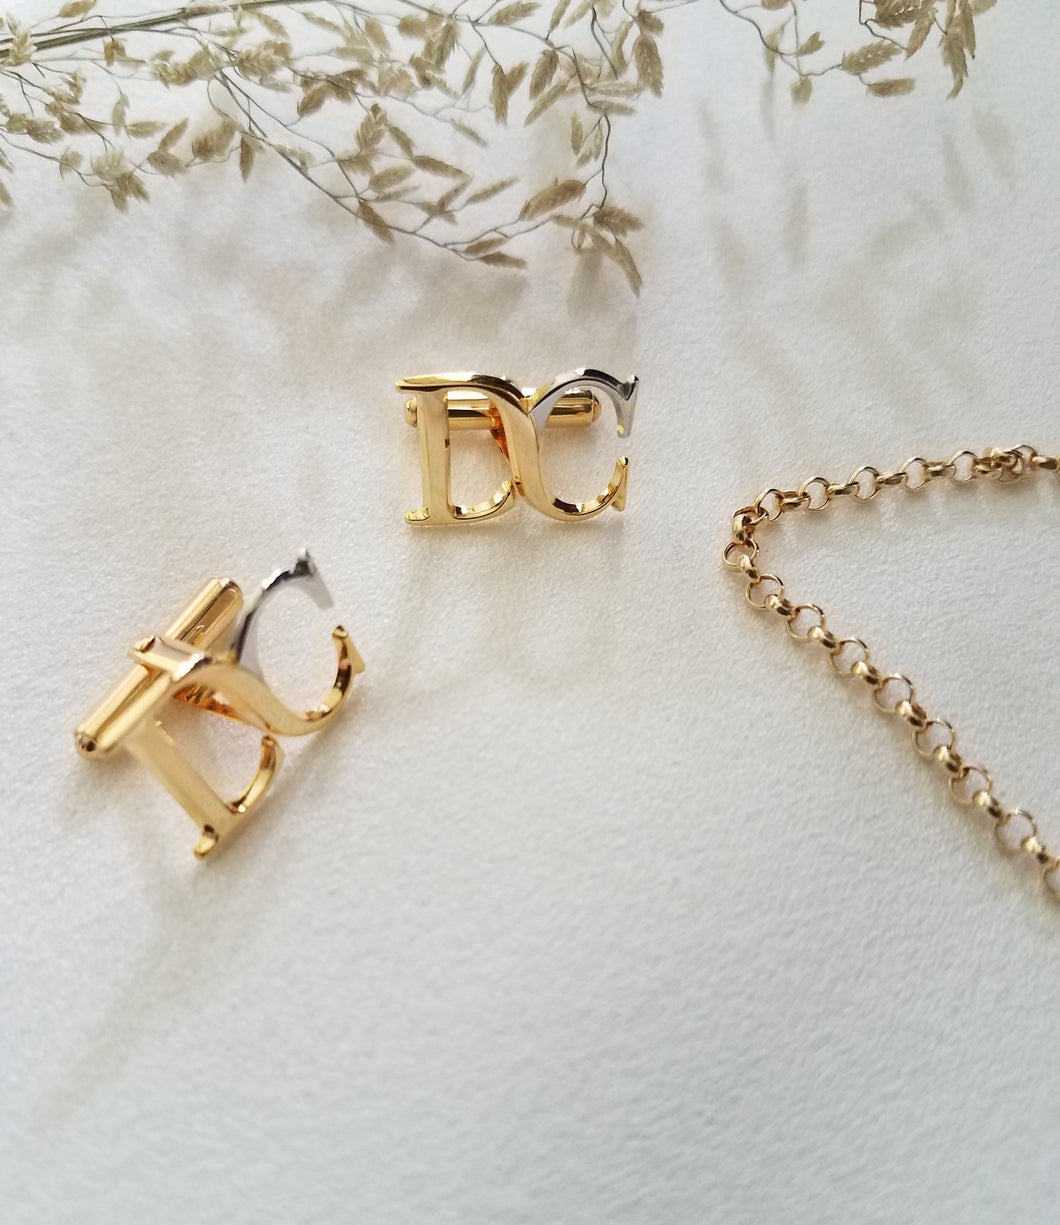 D and C initial cufflinks, set in two-tone (white gold & yellow gold). 